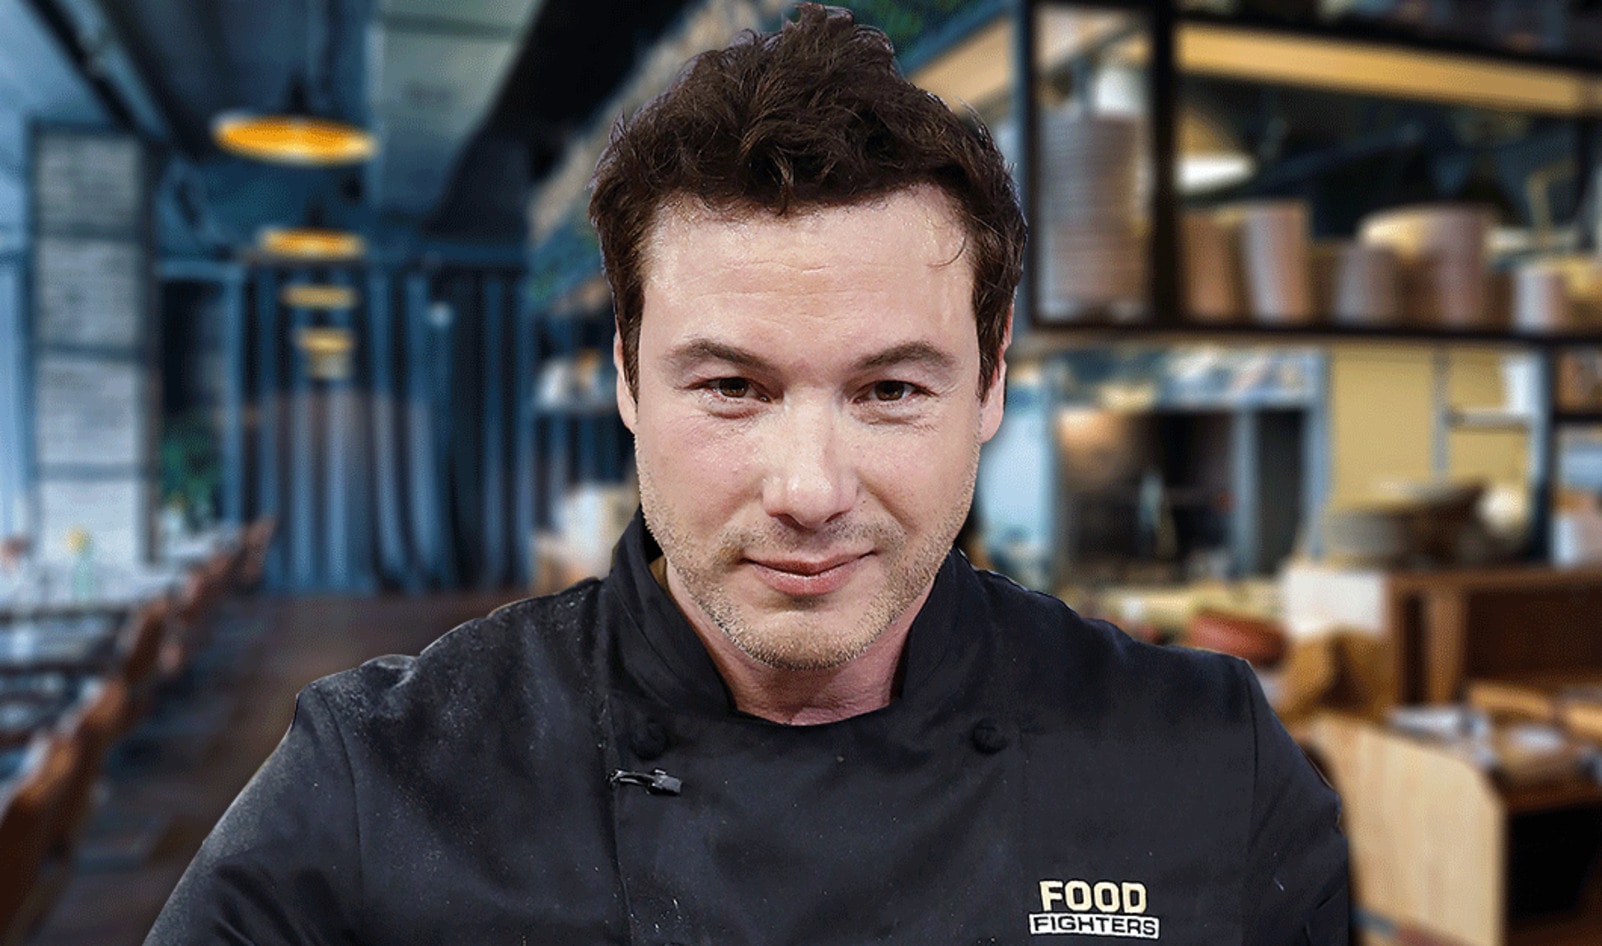 Celebrity Chef Rocco DiSpirito to FOX Business: There’s Nothing Fake About Beyond Meat